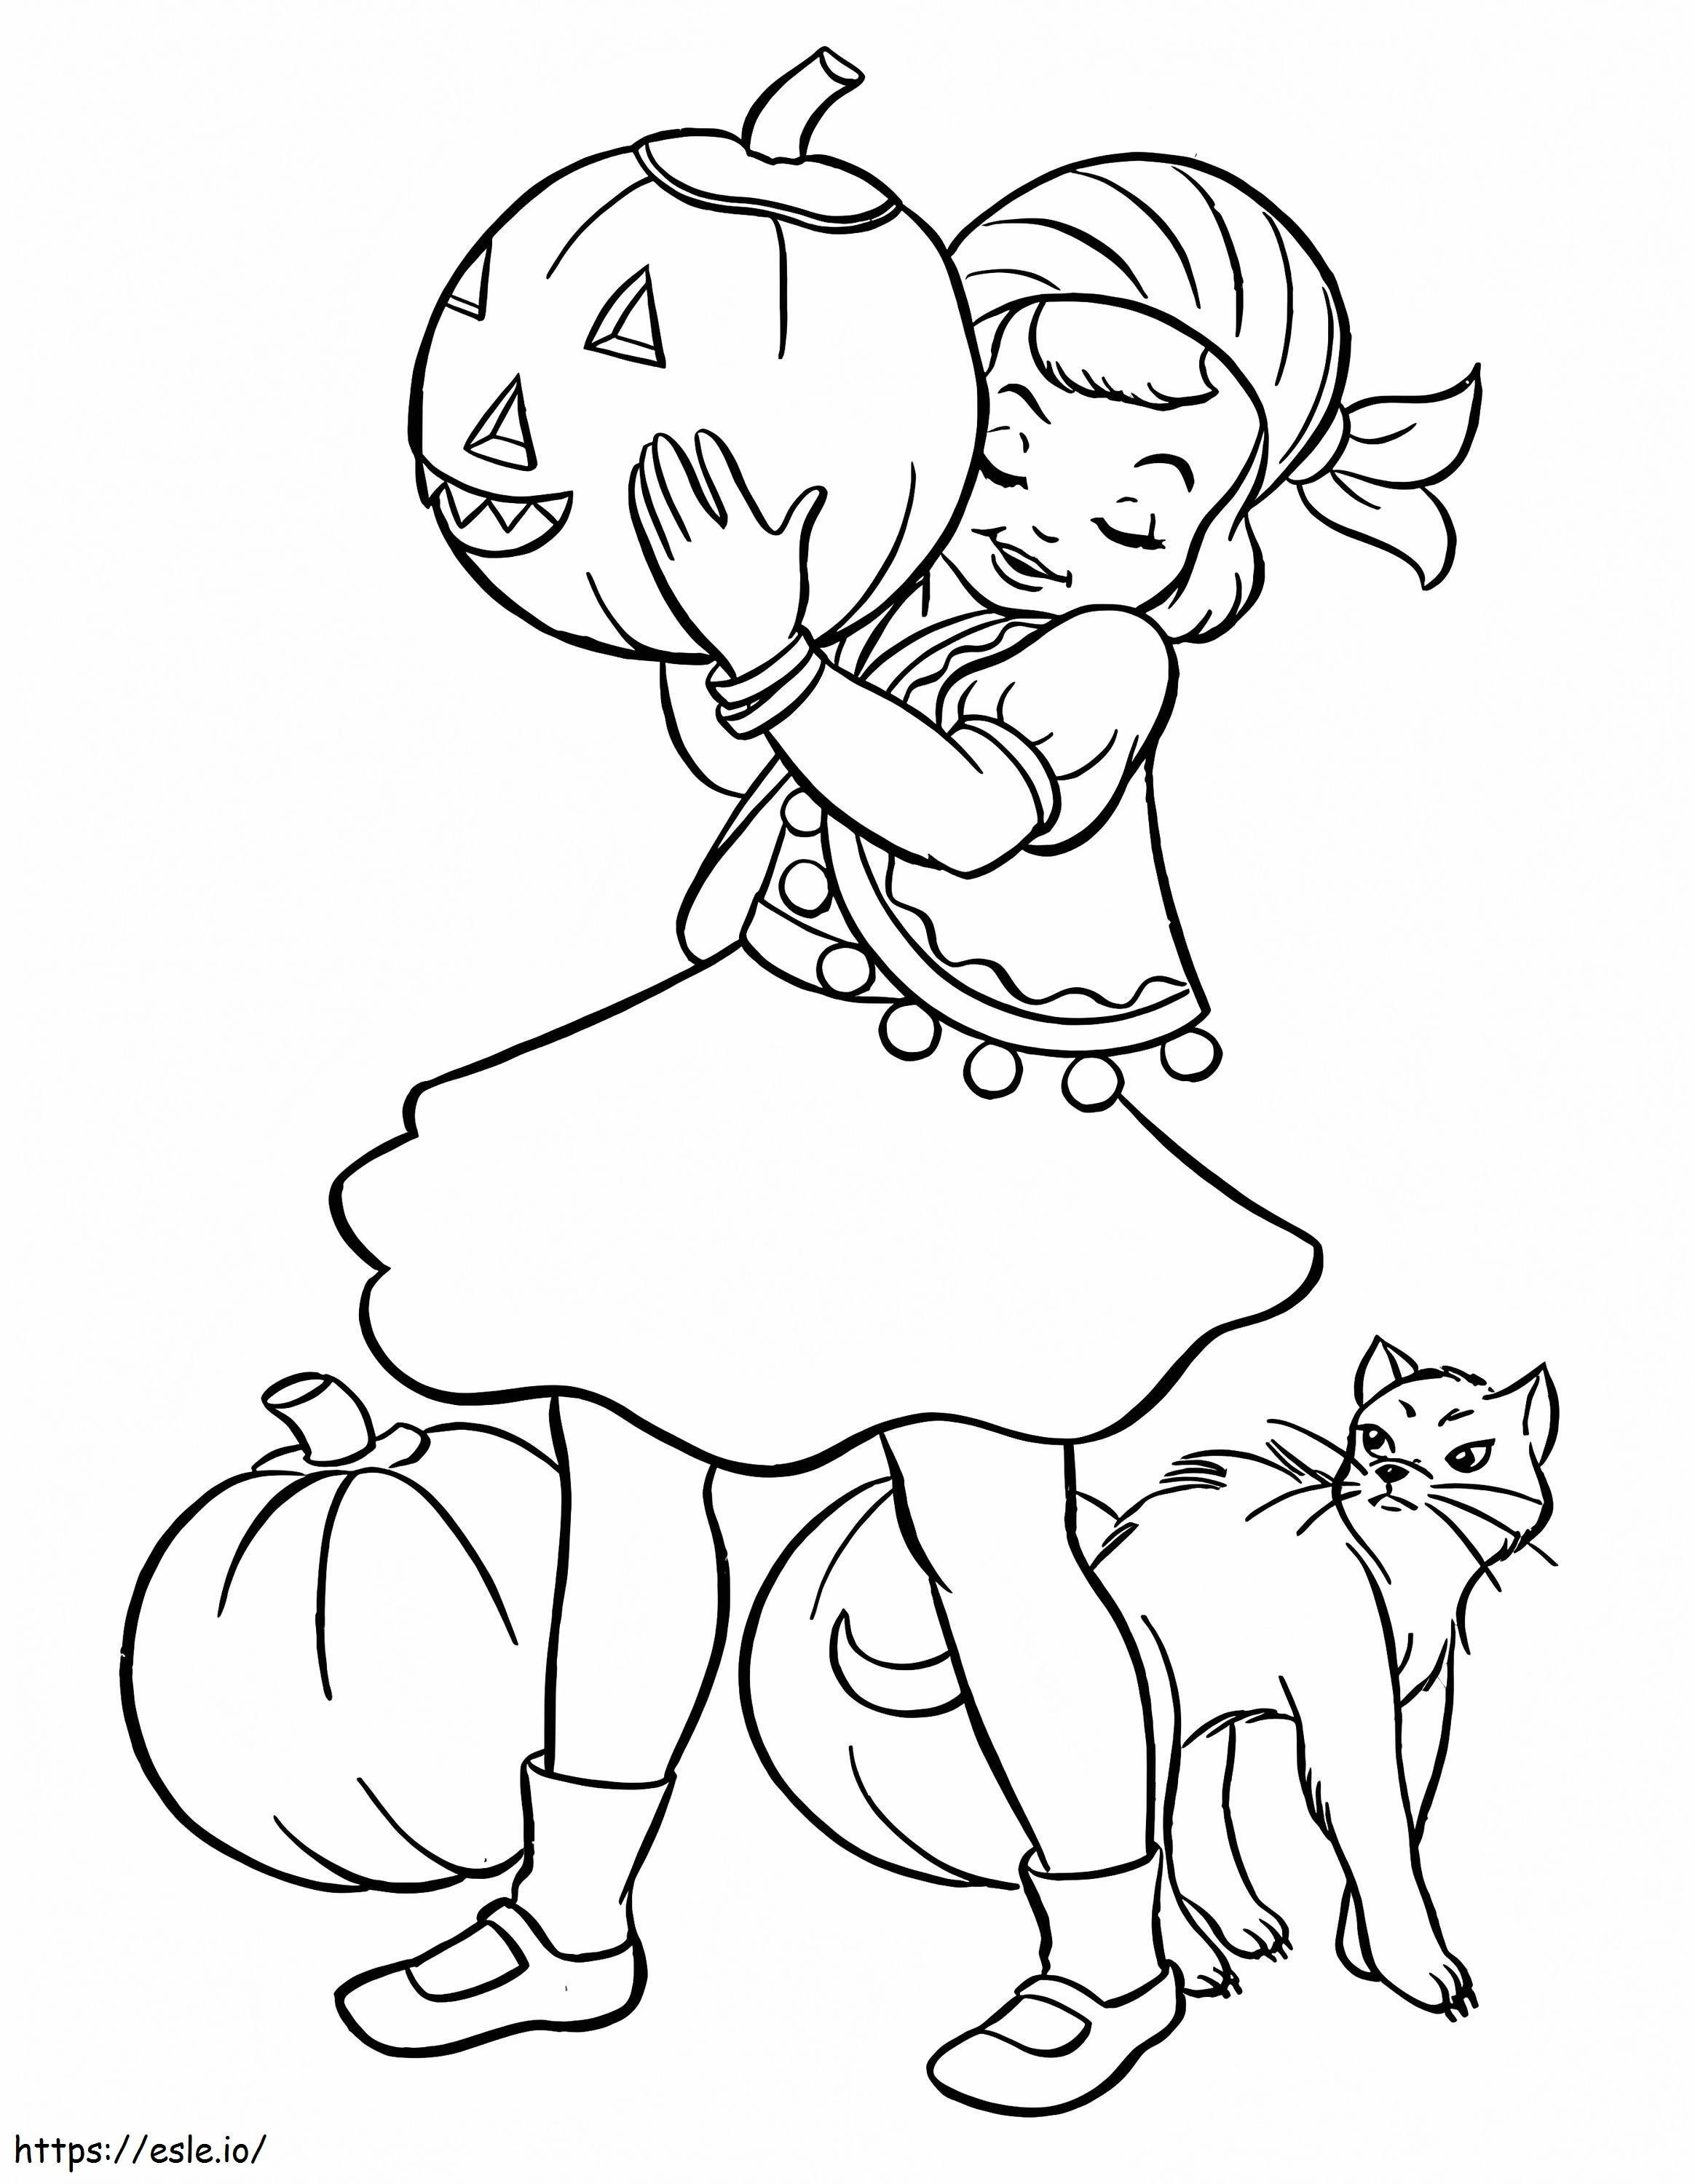 Cute Pirate Girl On Halloween coloring page